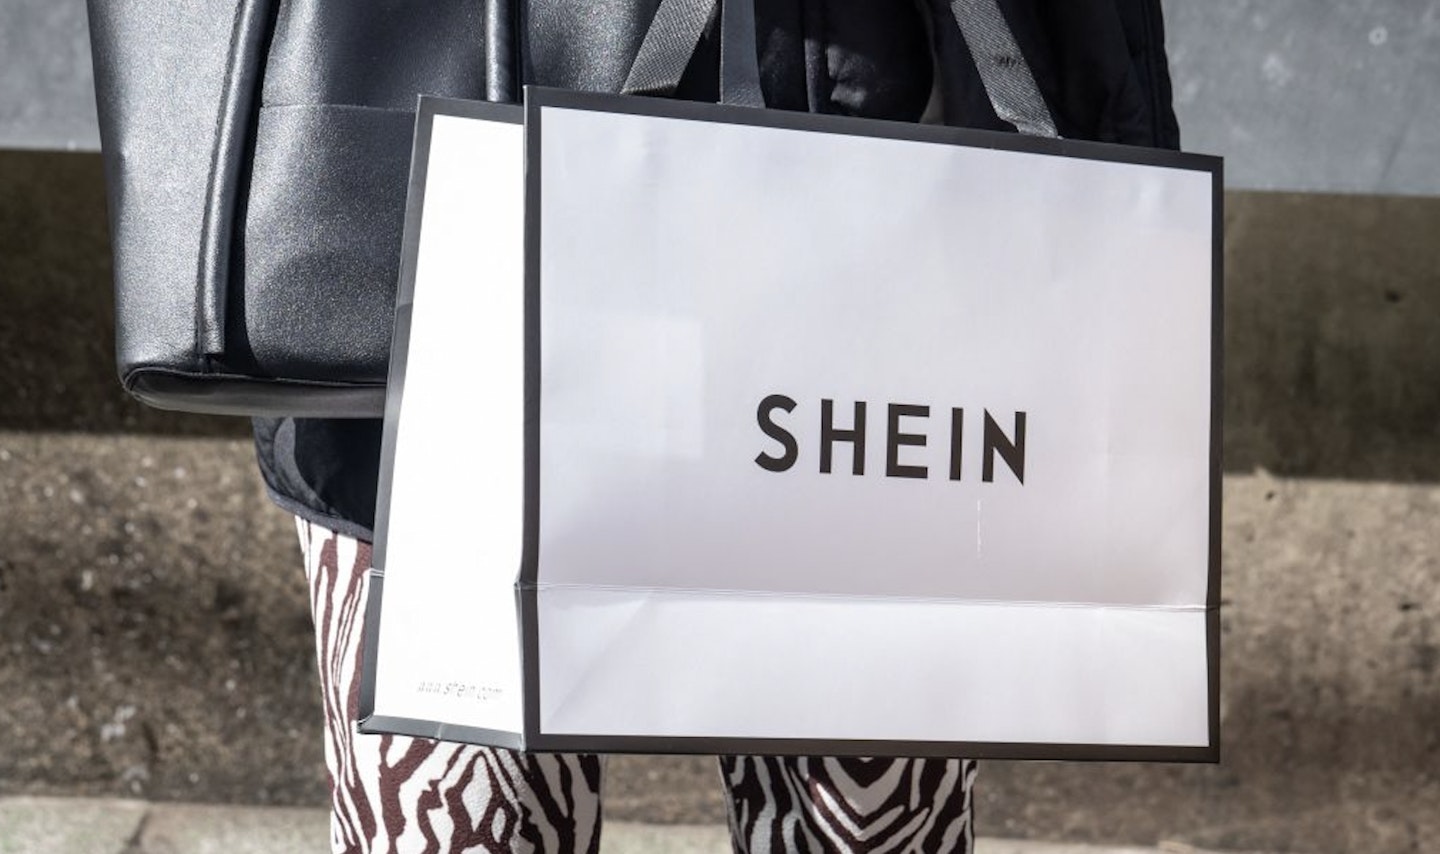 Why everyone's going mad for this £12 Shein dress